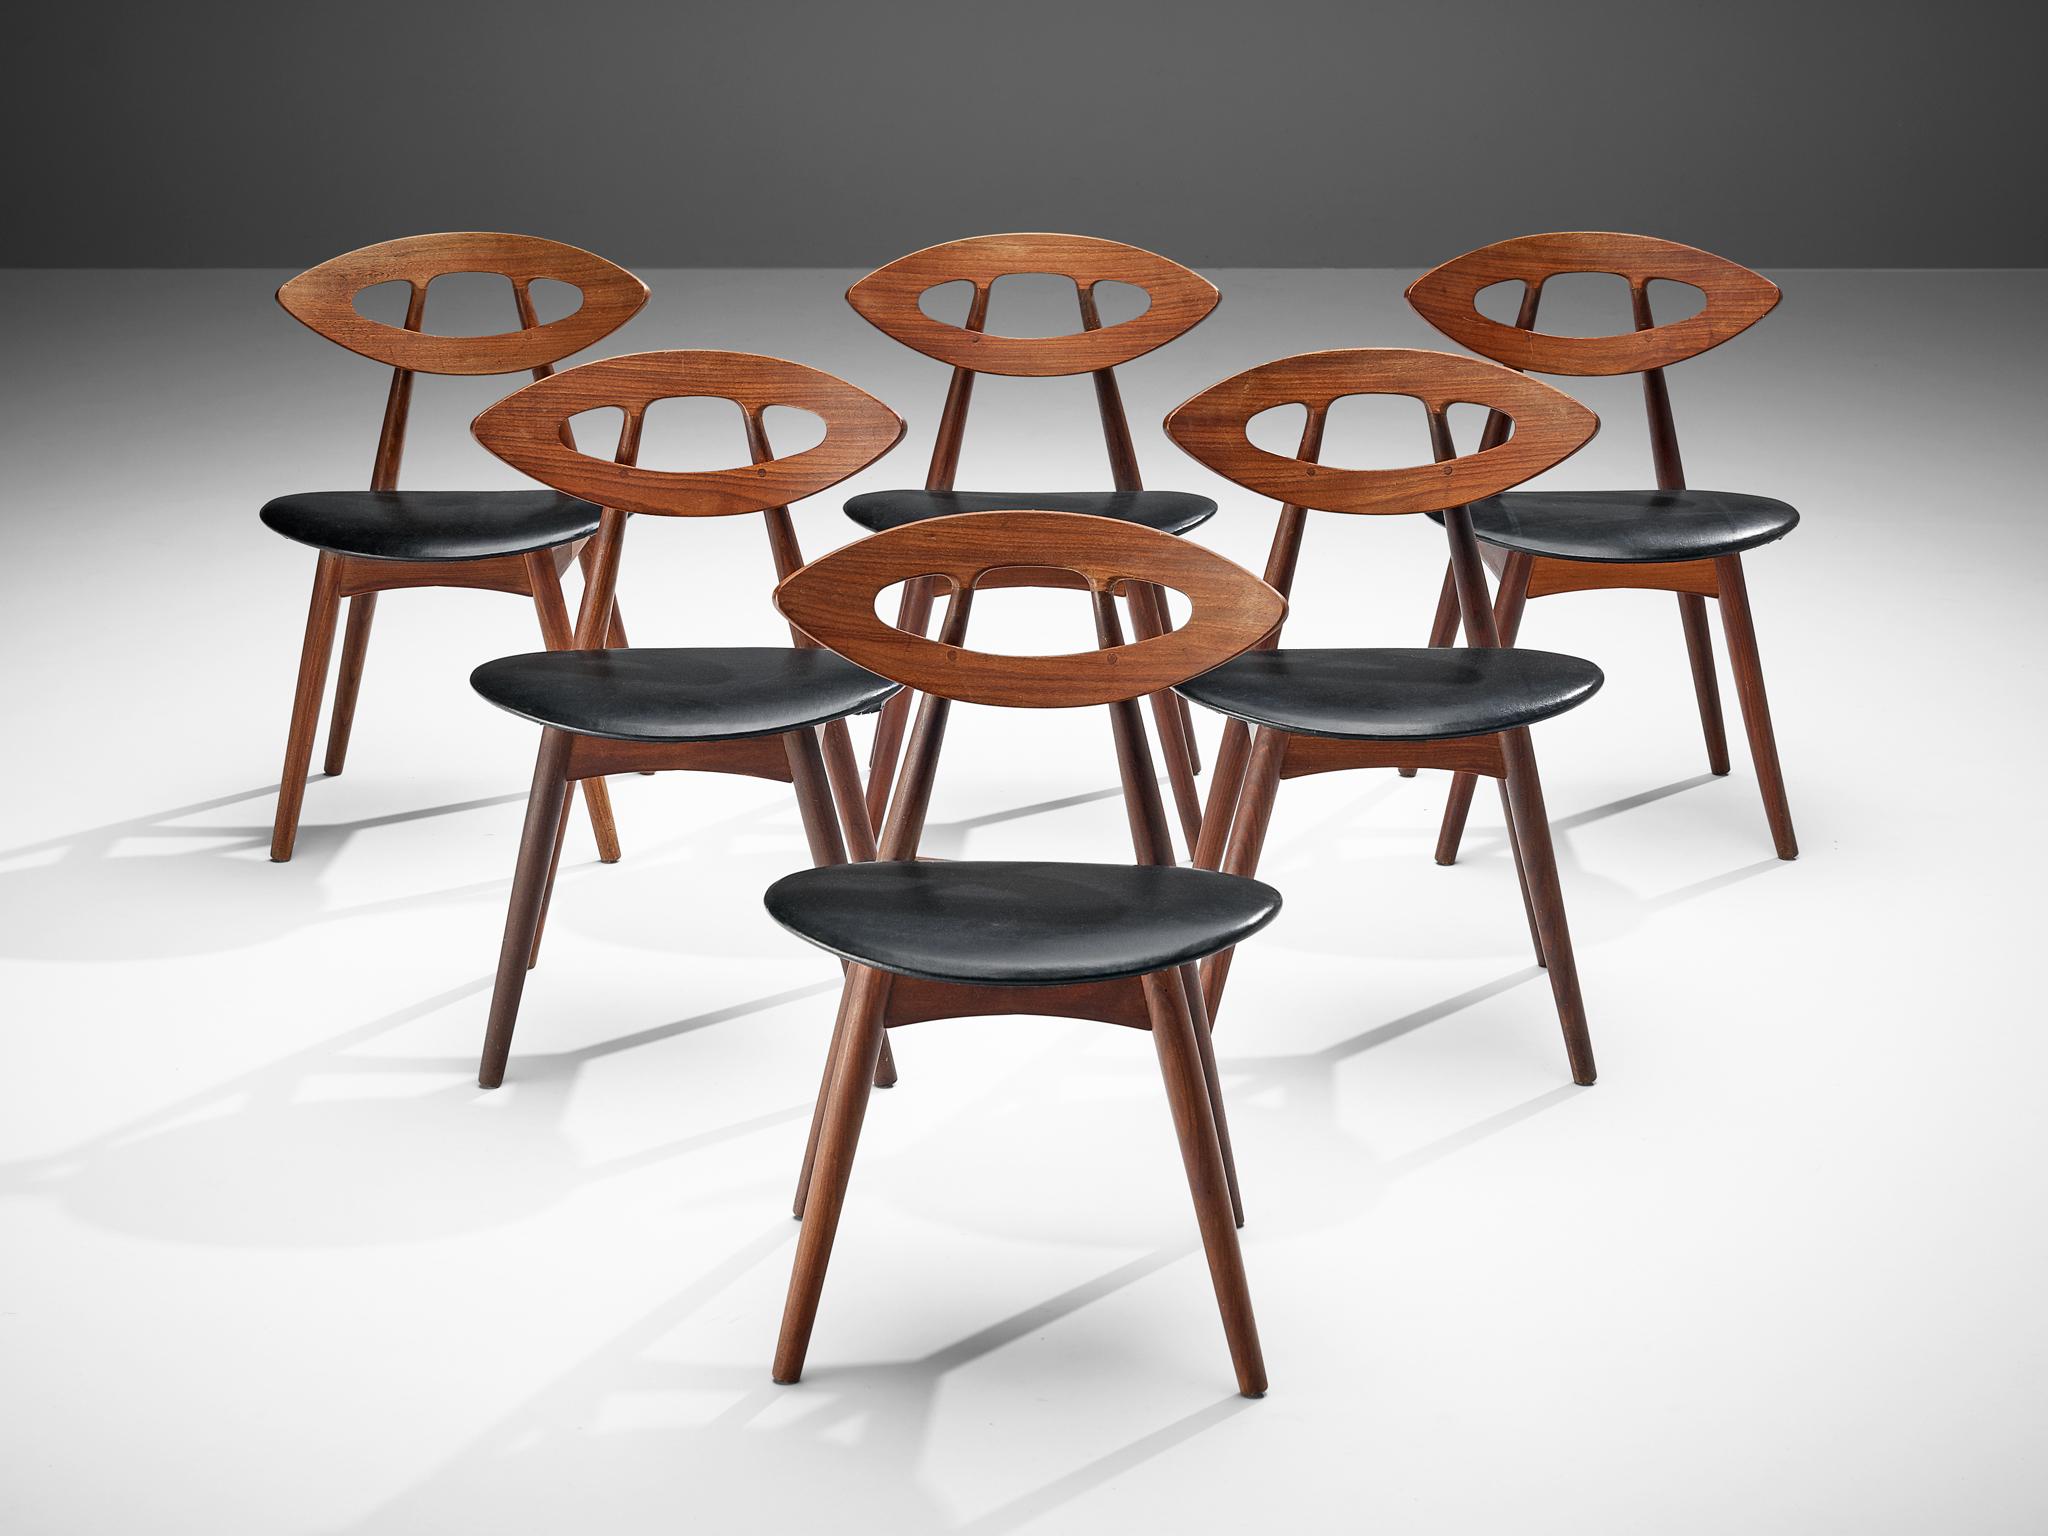 Ejvind A. Johansson for Ivan Gern Møbelfabrik, set of eight dining chairs model 84 'Eye,' in teak and black leather, Denmark, design 1961, production 1970s.

Wonderful and exclusive set of six eye chairs by Danish designer Ejvind Johansson as part